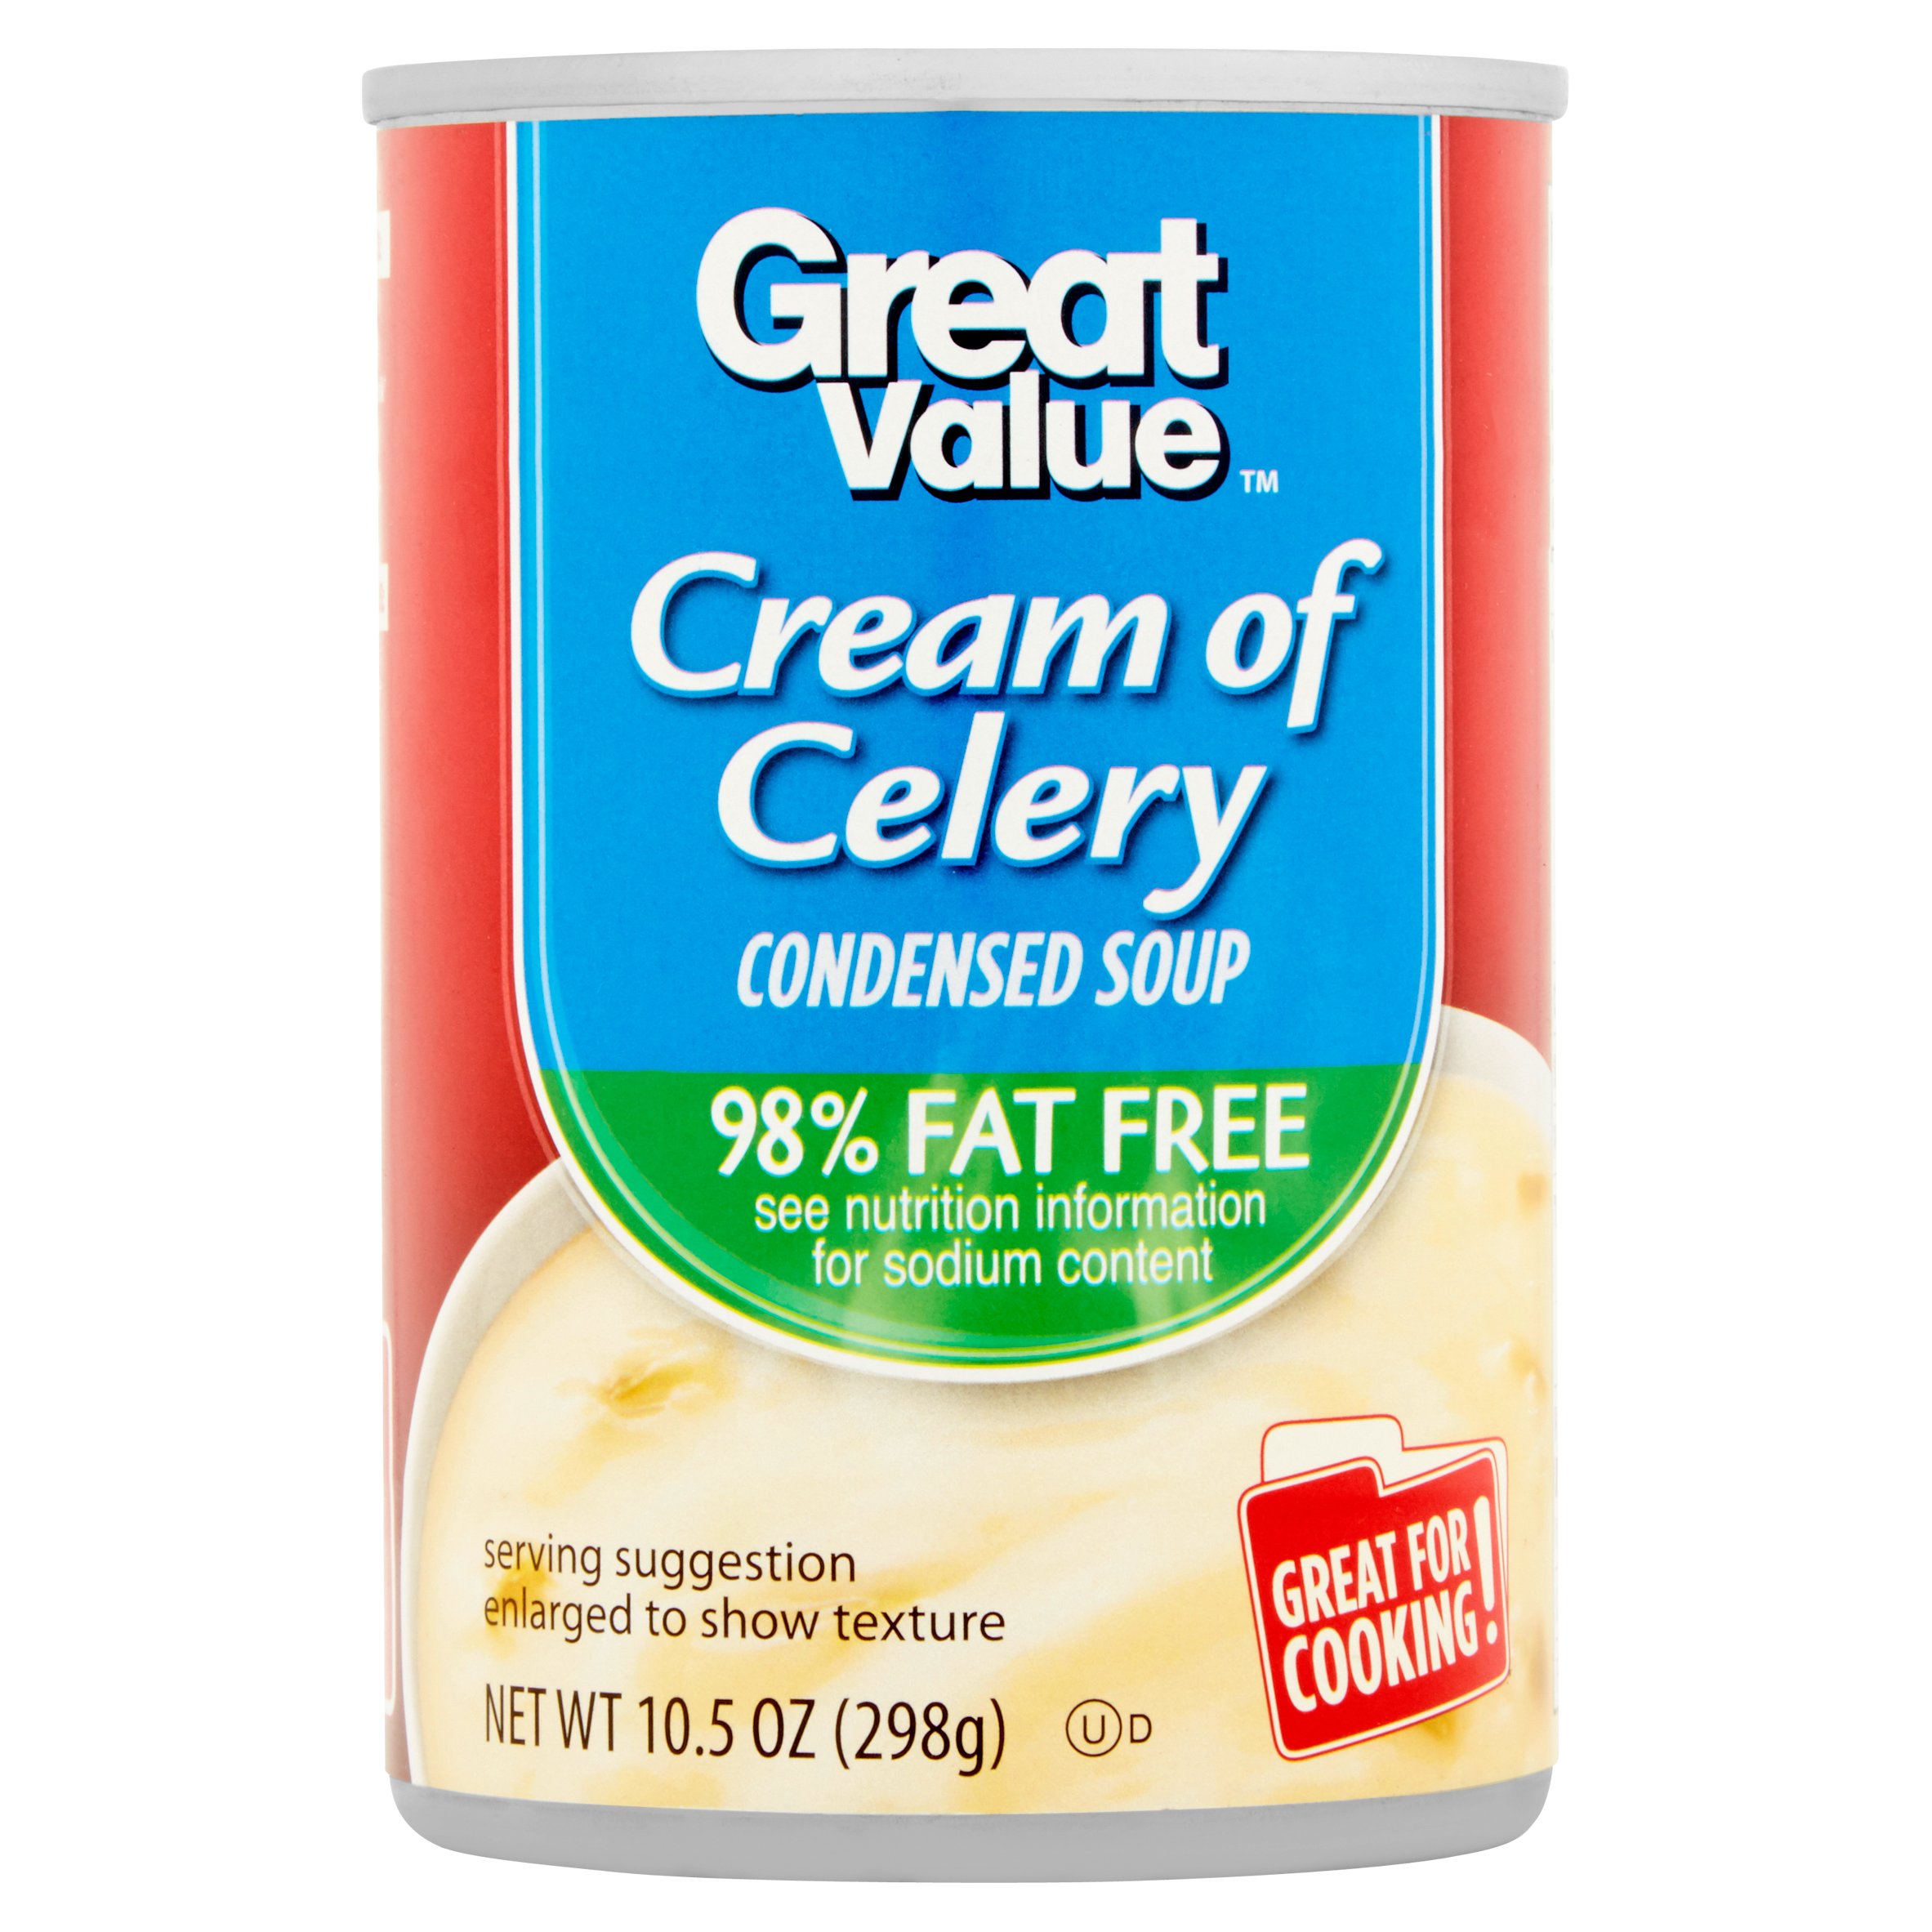 Great Value 98% Fat Free Cream of Celery Condensed Soup, 10.5 Oz Image